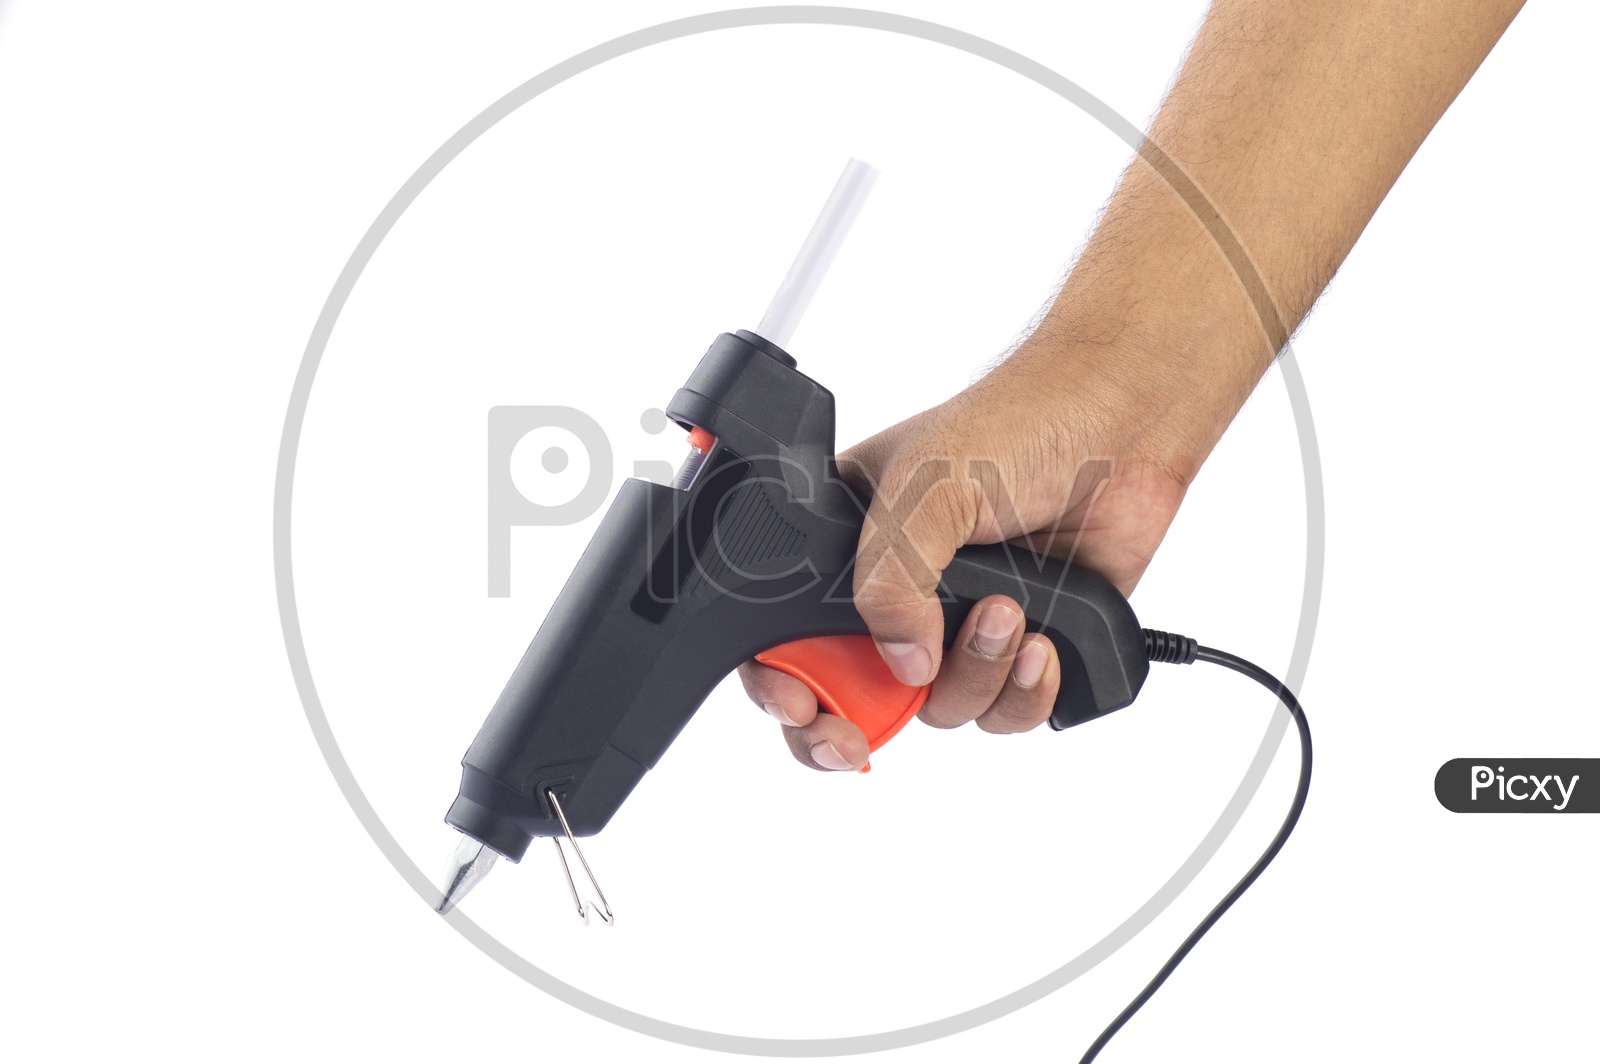 A Man Holding a Hot Glue Gun In Hand Over a White Isolated Background